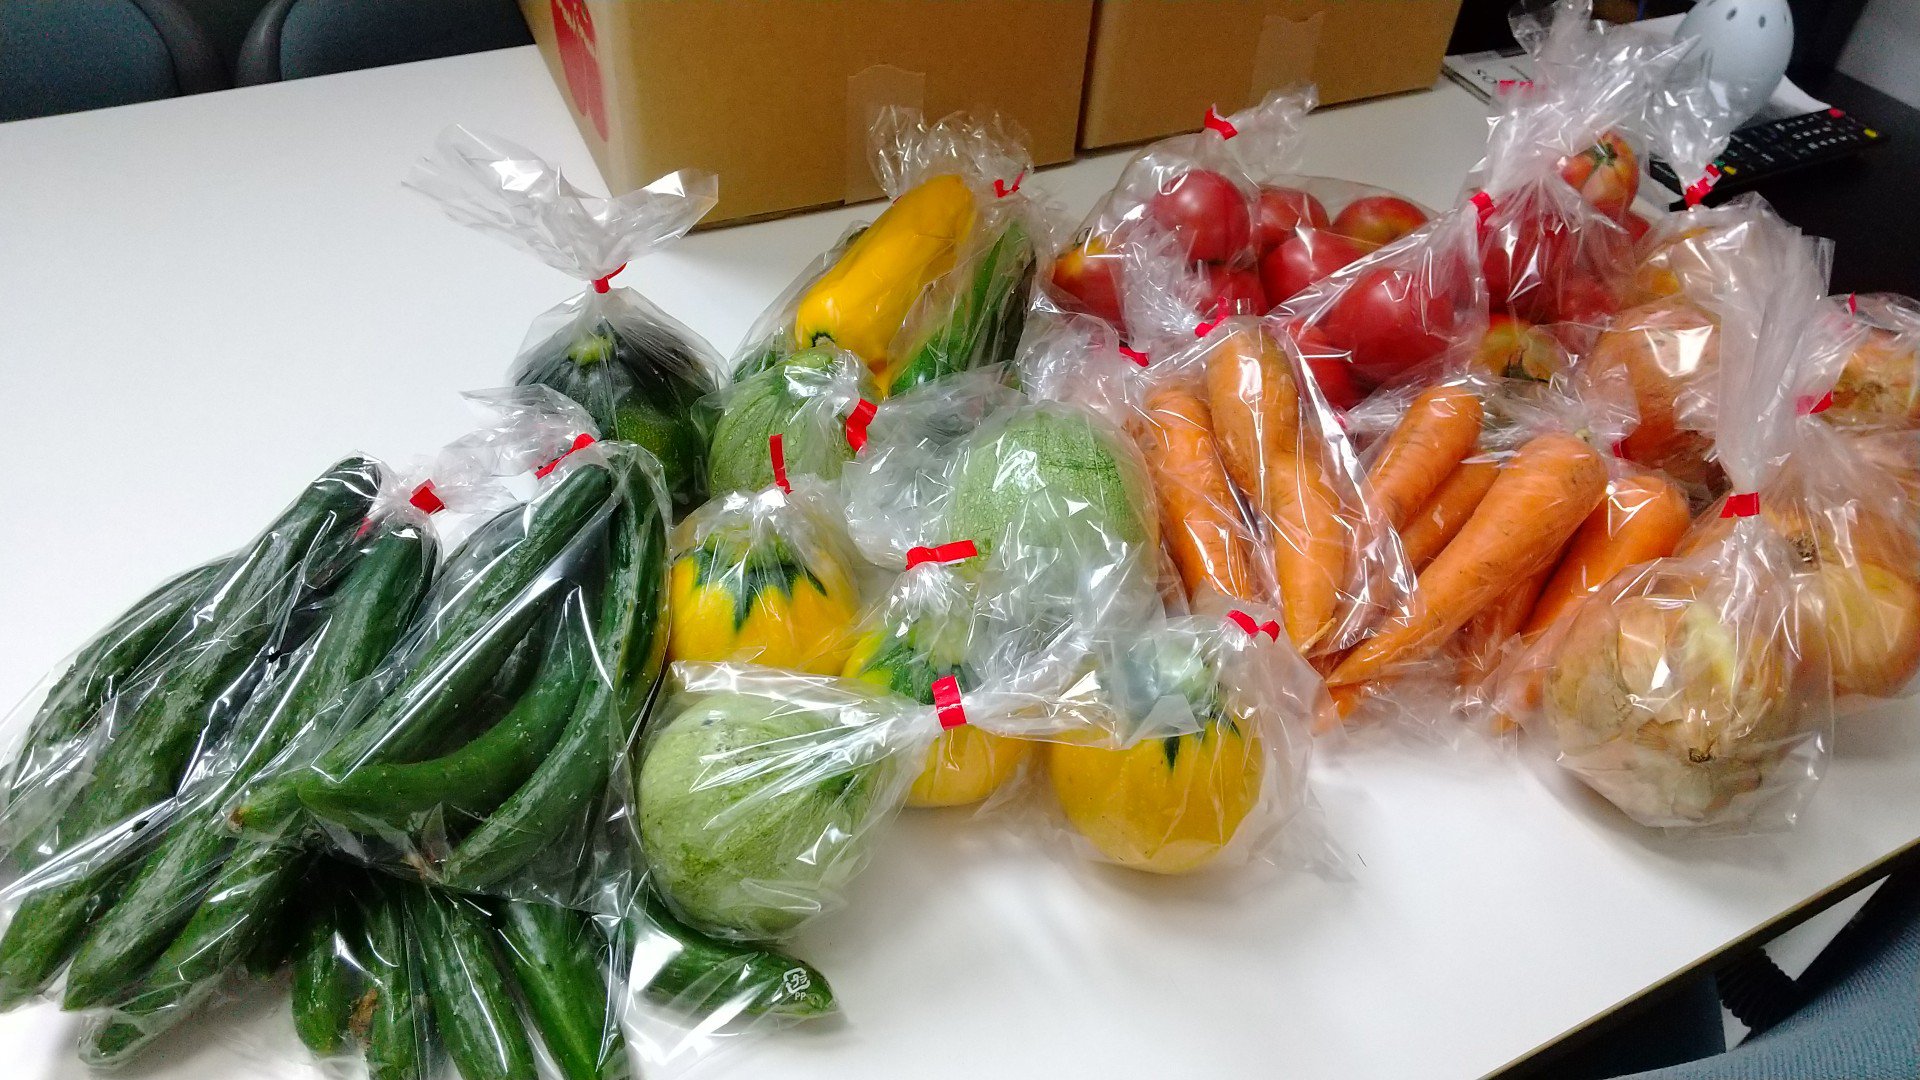 Ms. Takahashi donated vegetables (tomato, cucumber, zucchini, carrot and onion)  to the international students